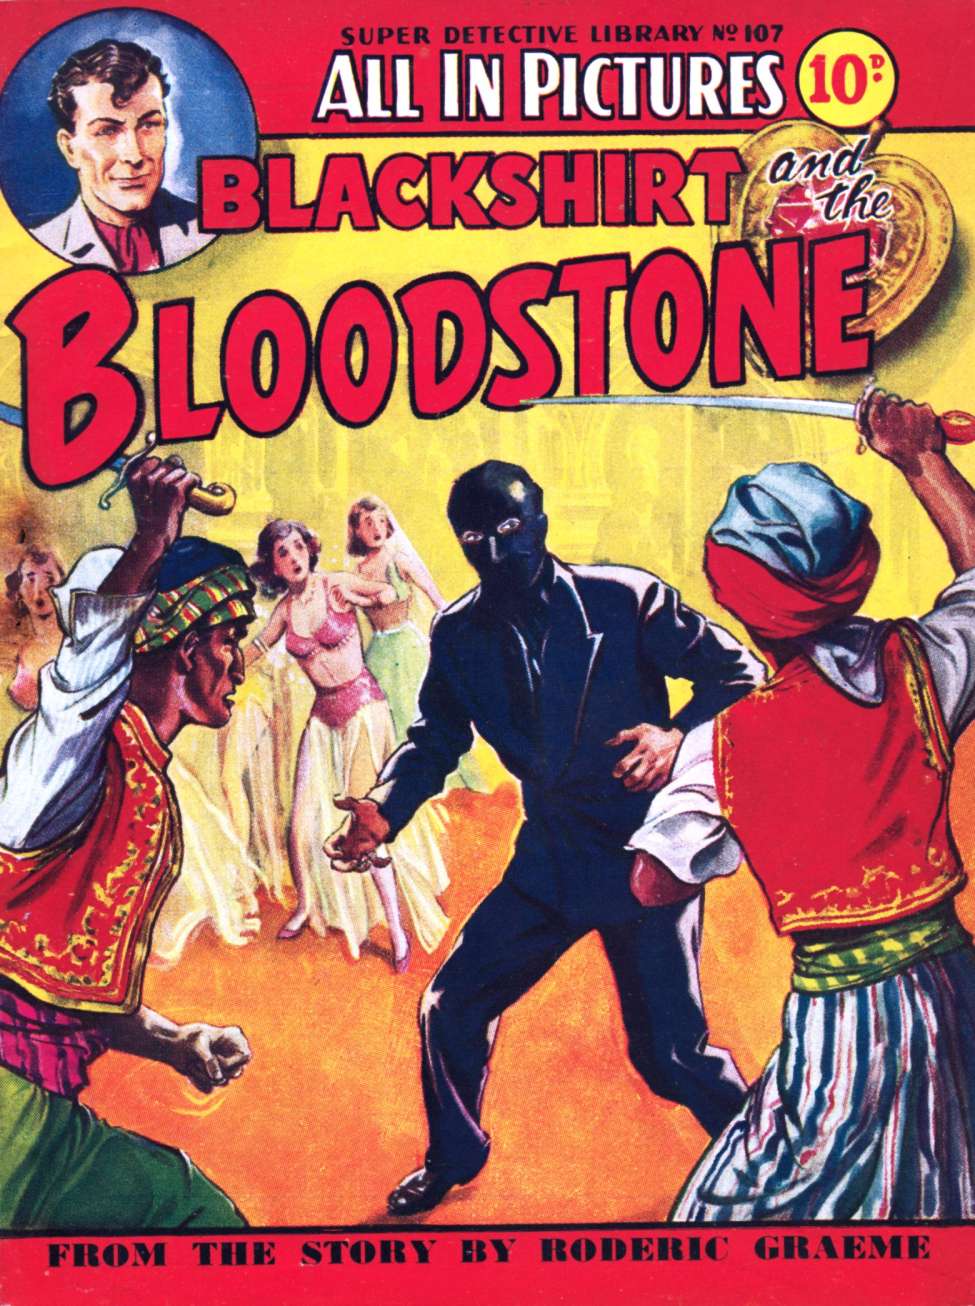 Book Cover For Super Detective Library 107 - Blackshirt and The Bloodstone